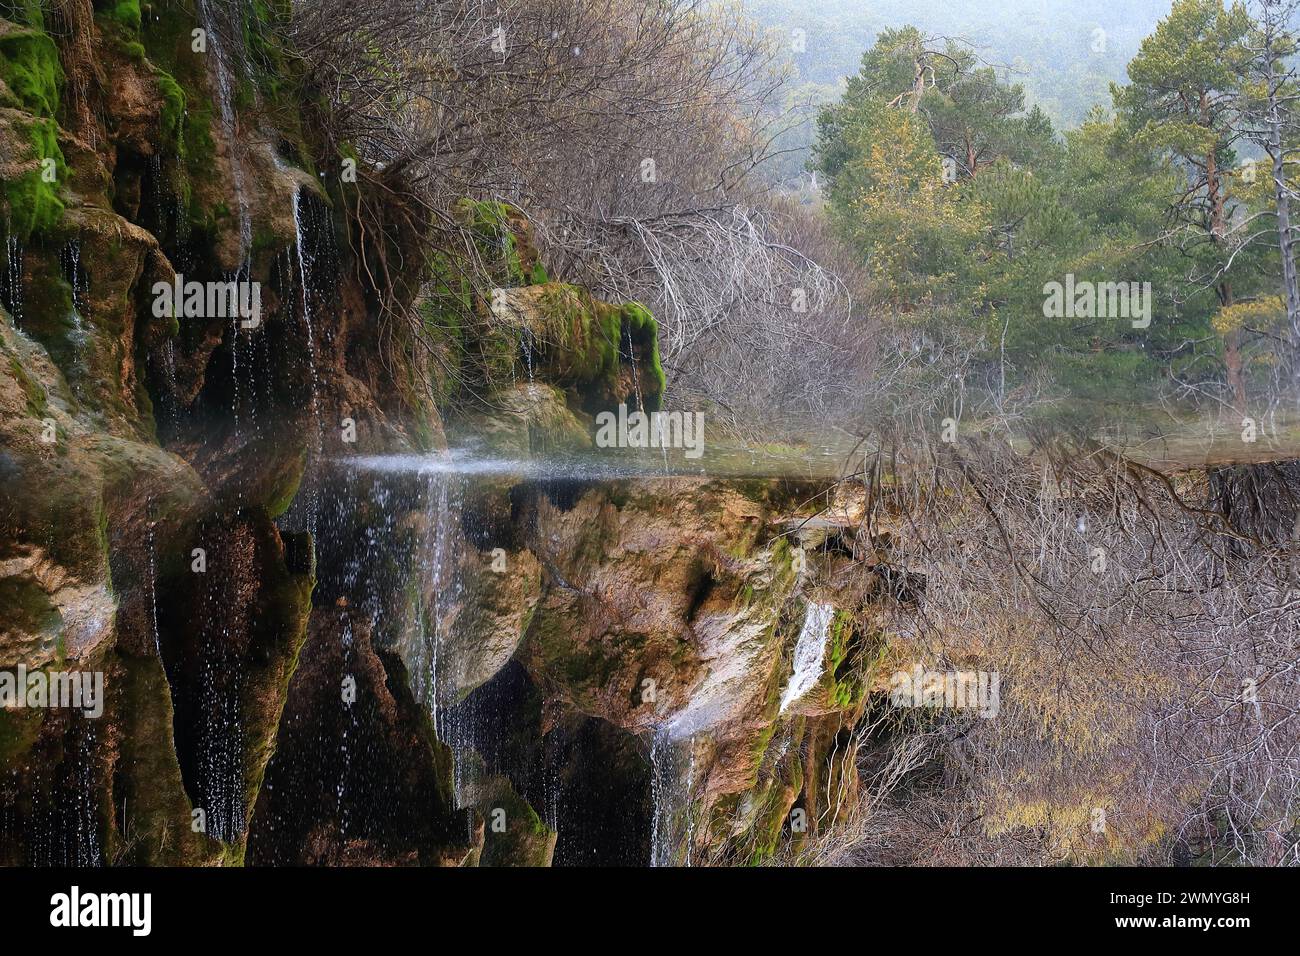 Water cascades over mossy rocks at the source of the Cuervo River in Cuenca, framed by a woodland backdrop Stock Photo